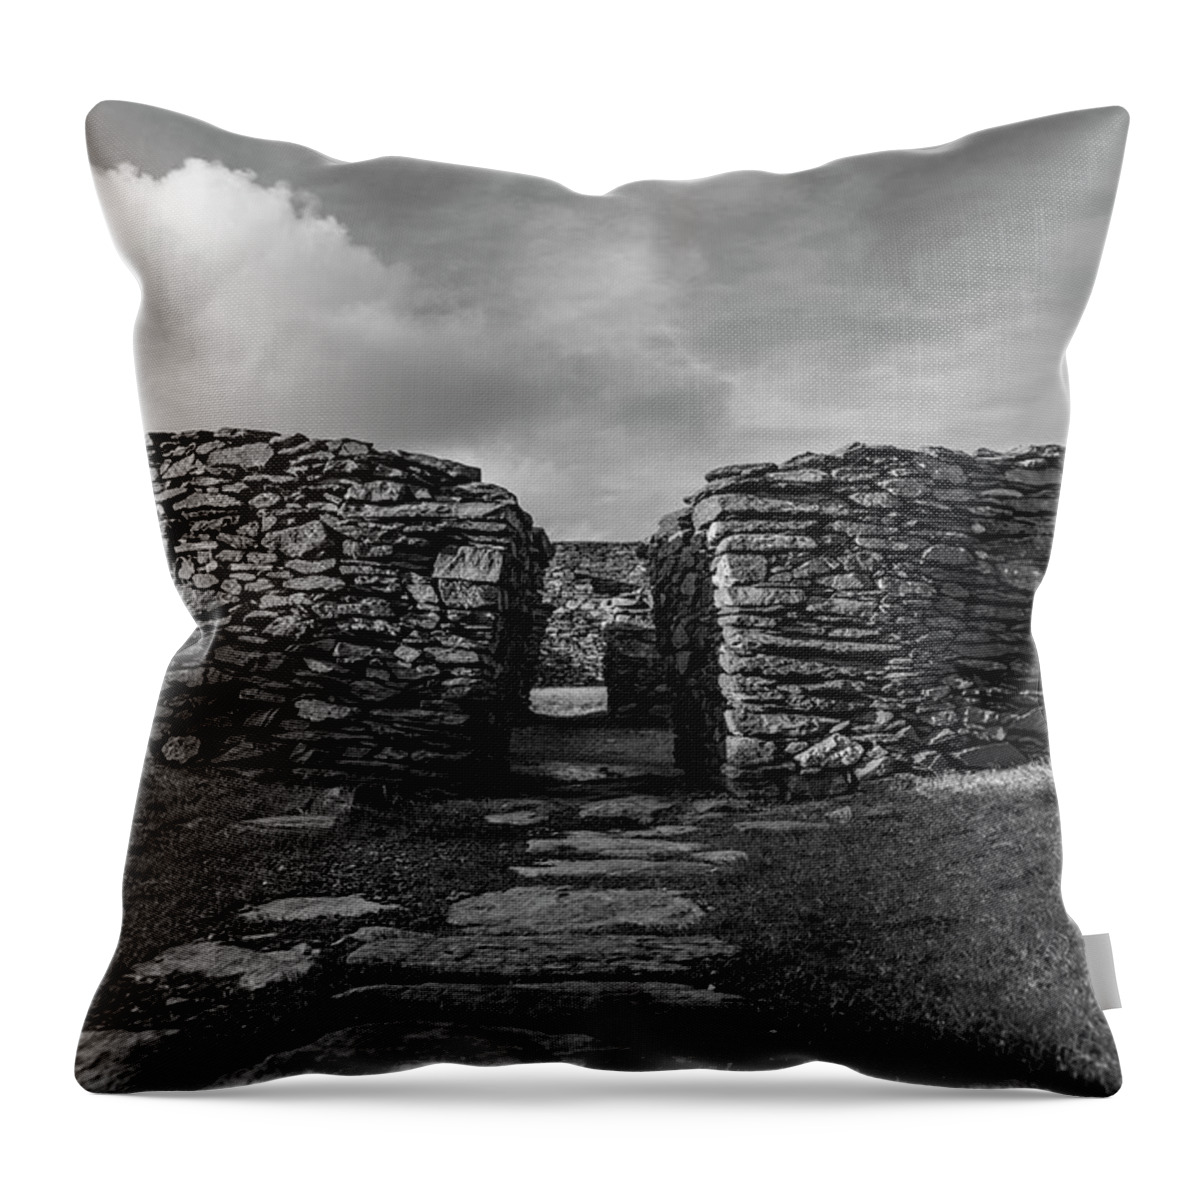 Cahergall Stone Fort Throw Pillow featuring the photograph Cahergall Stone Fort Ireland Black and white by John McGraw